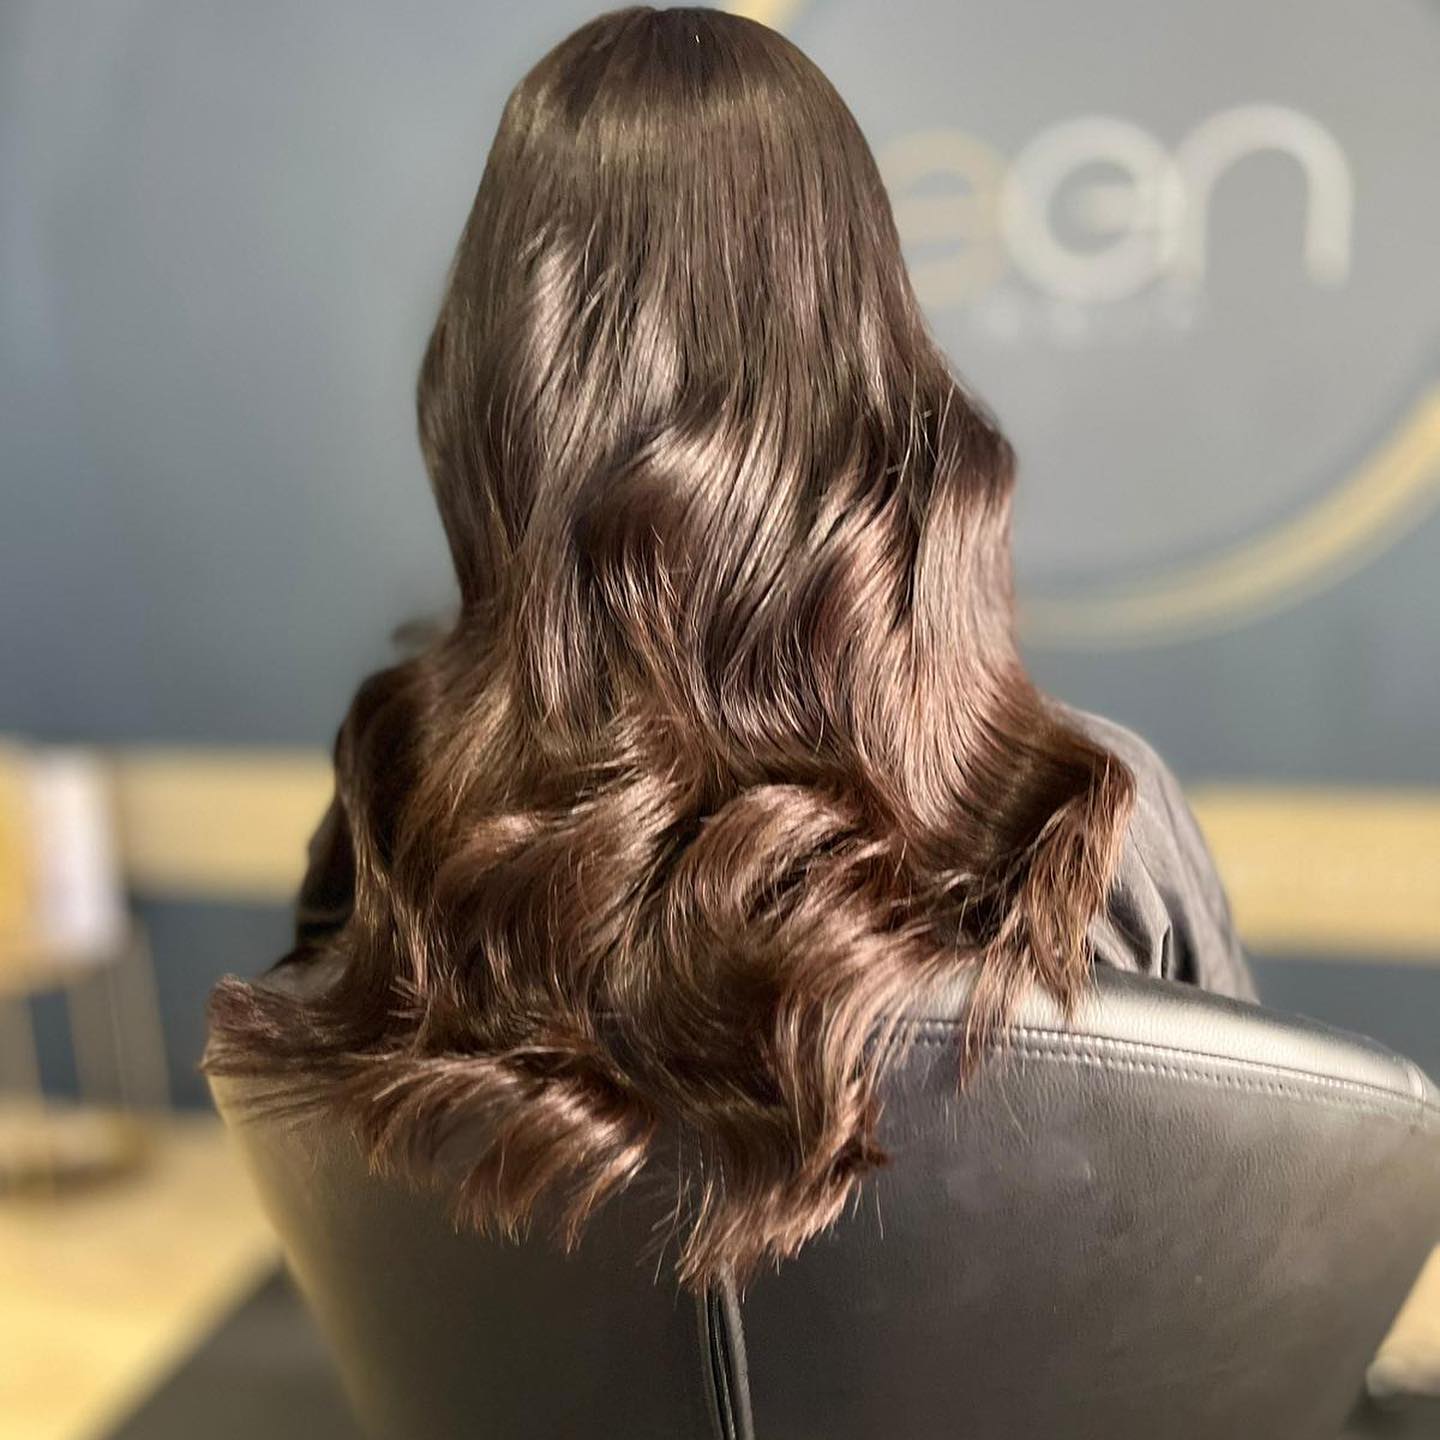 We are now offering Zen hair extensions